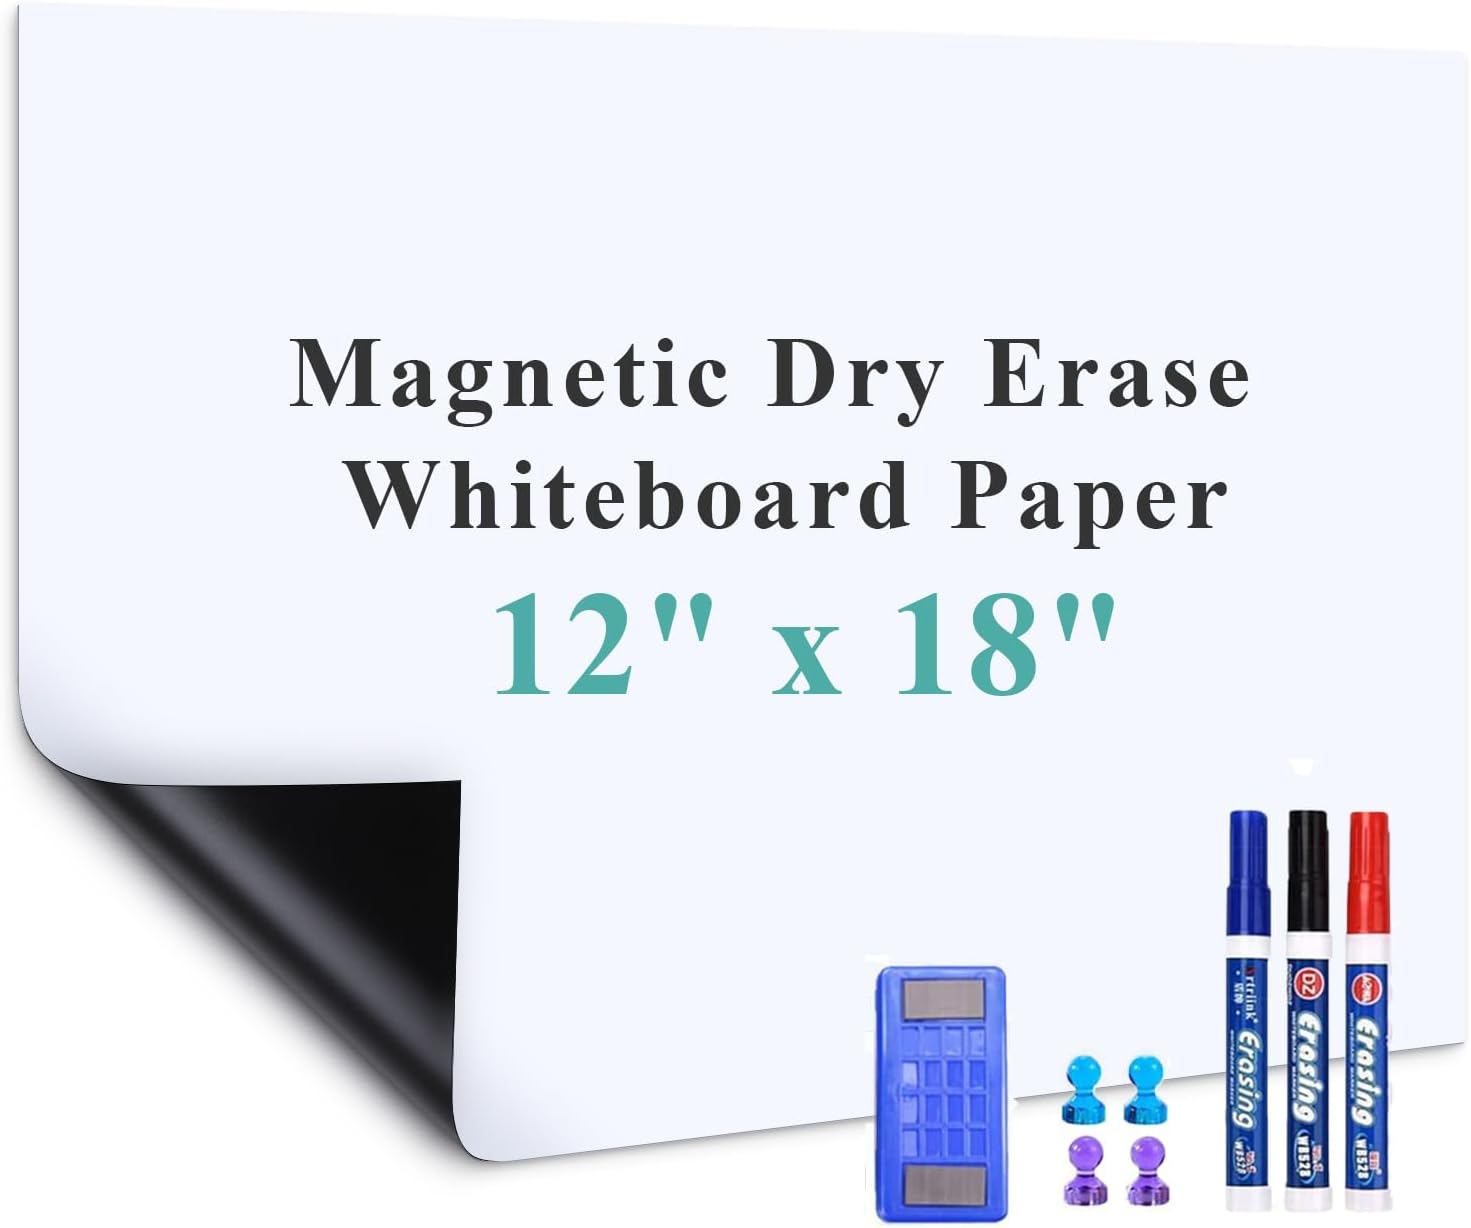 Magnetic Dry Erase Whiteboard Paper